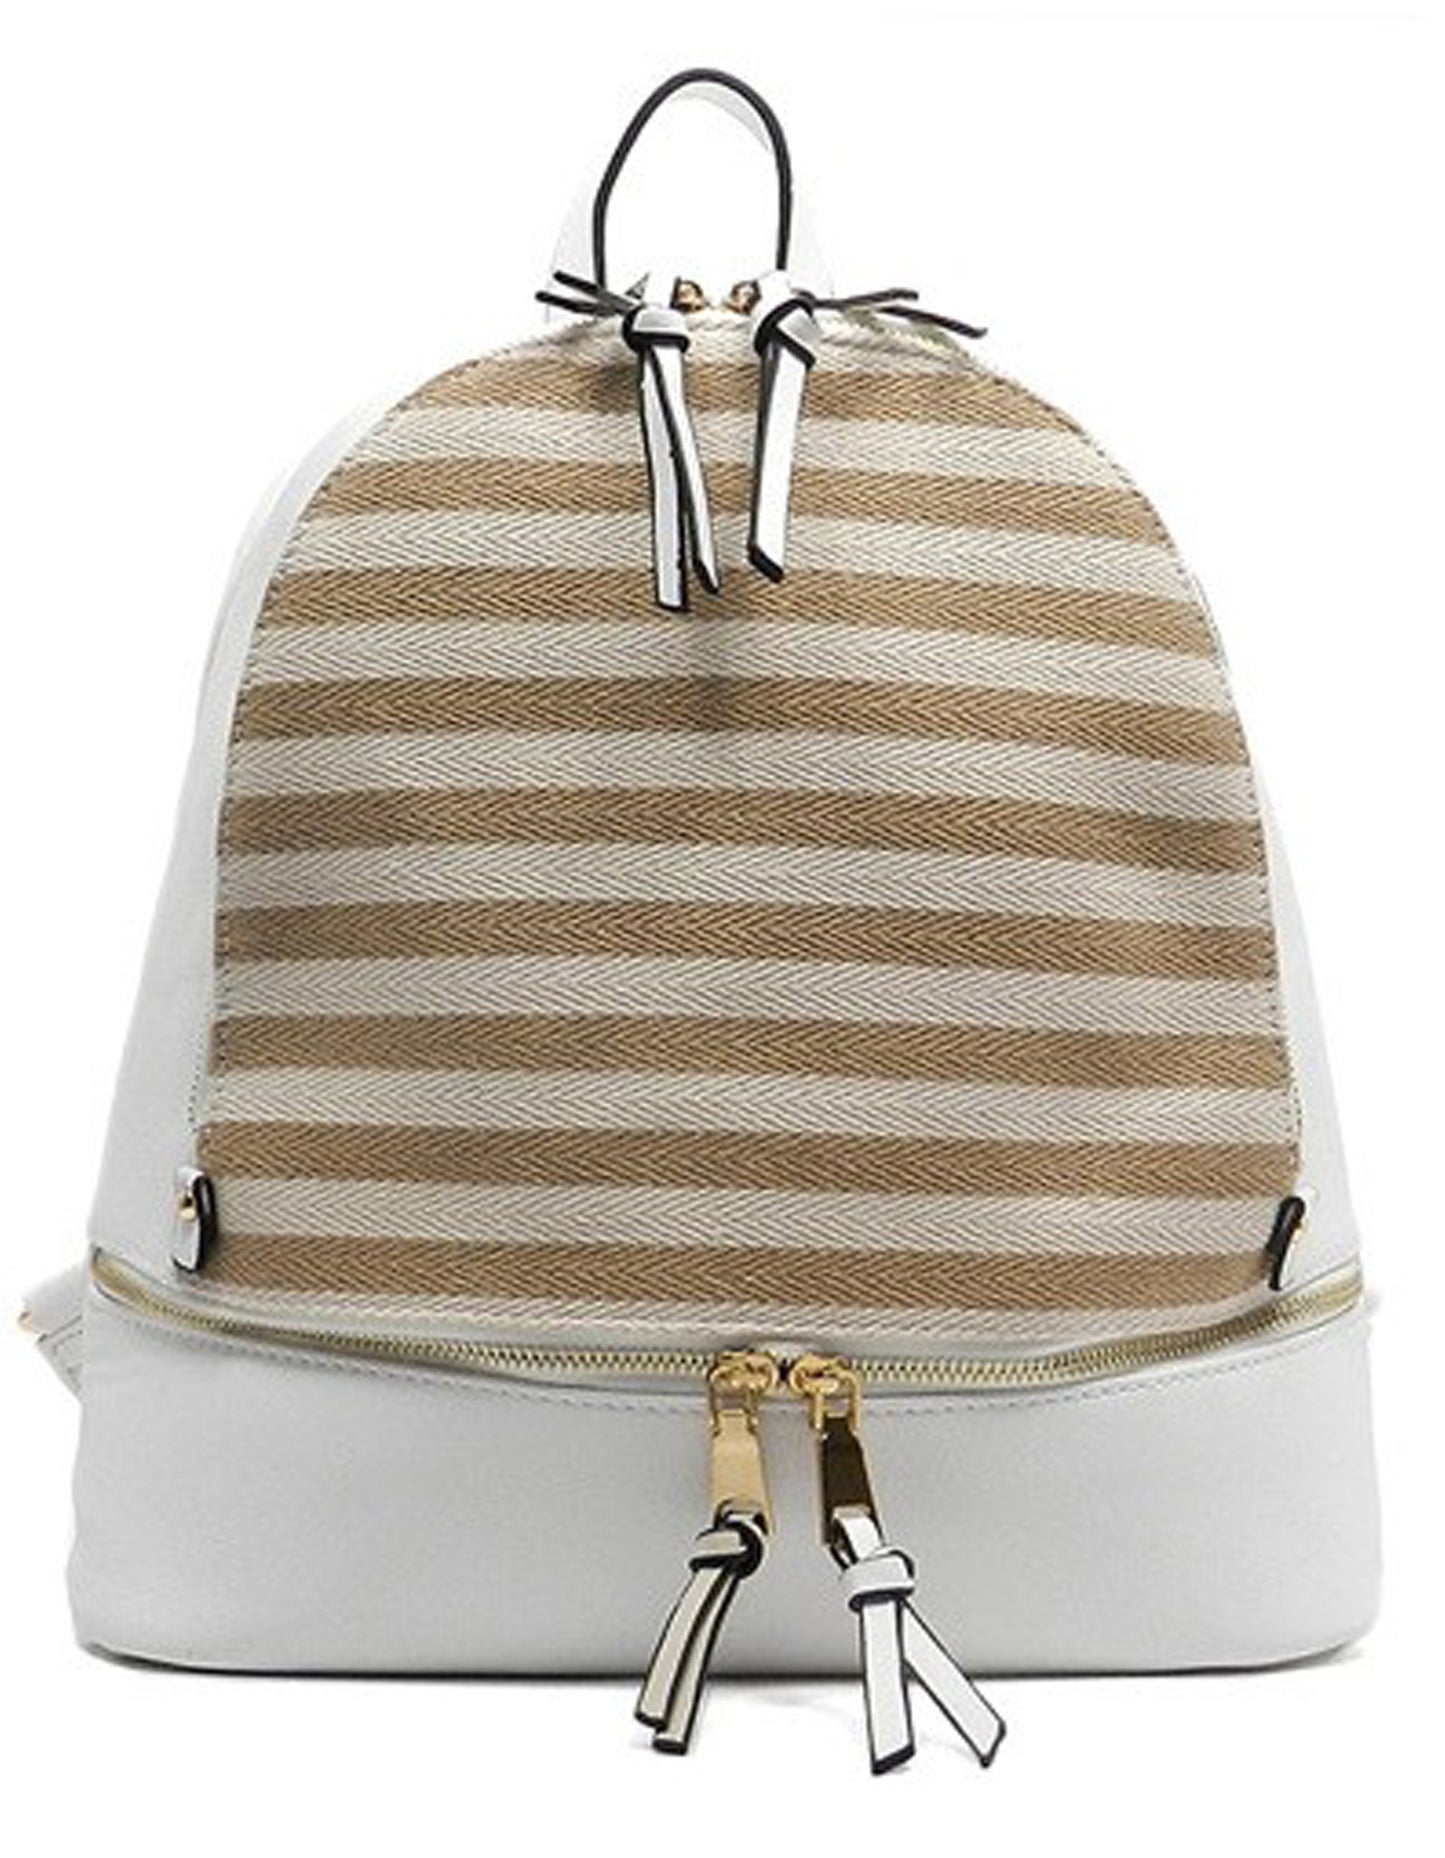 Fashion Elegant White Backpack with Striped Patterns